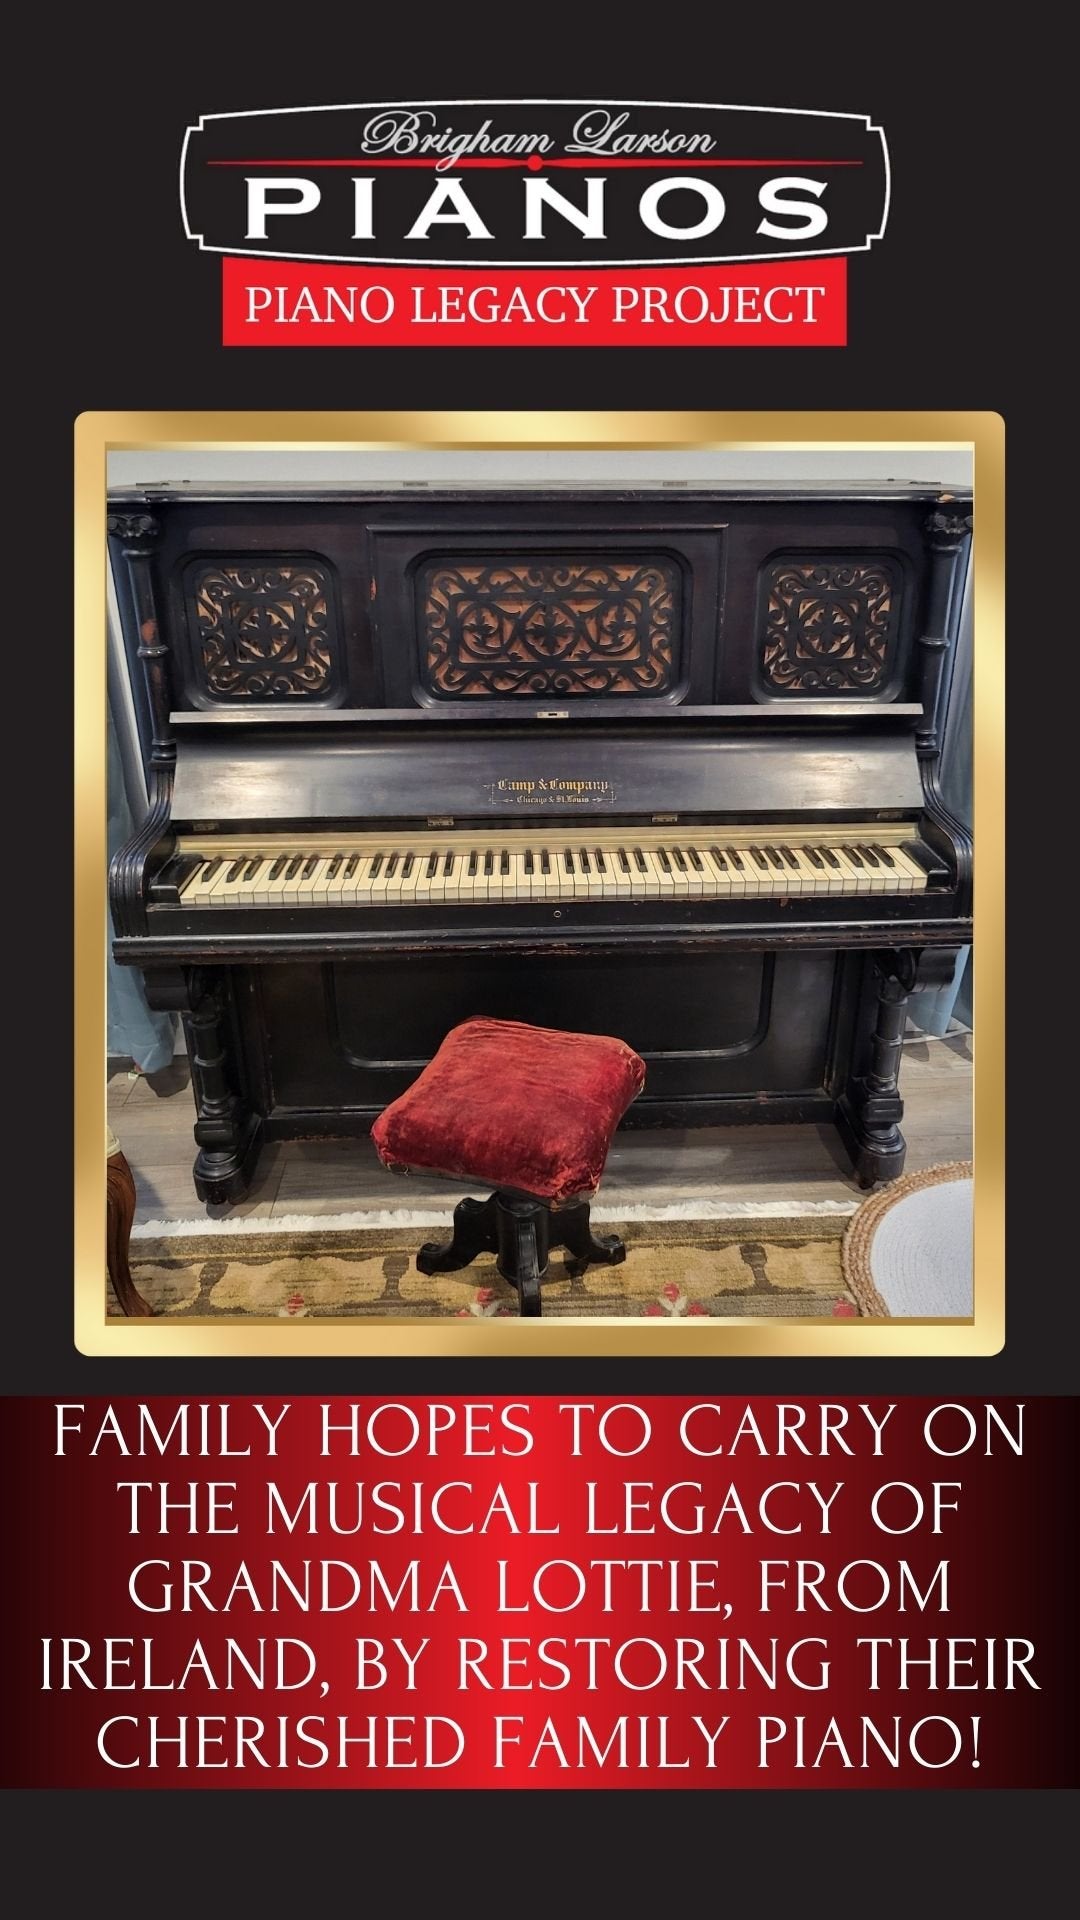 Image 2 of The Cassidy Family Piano!